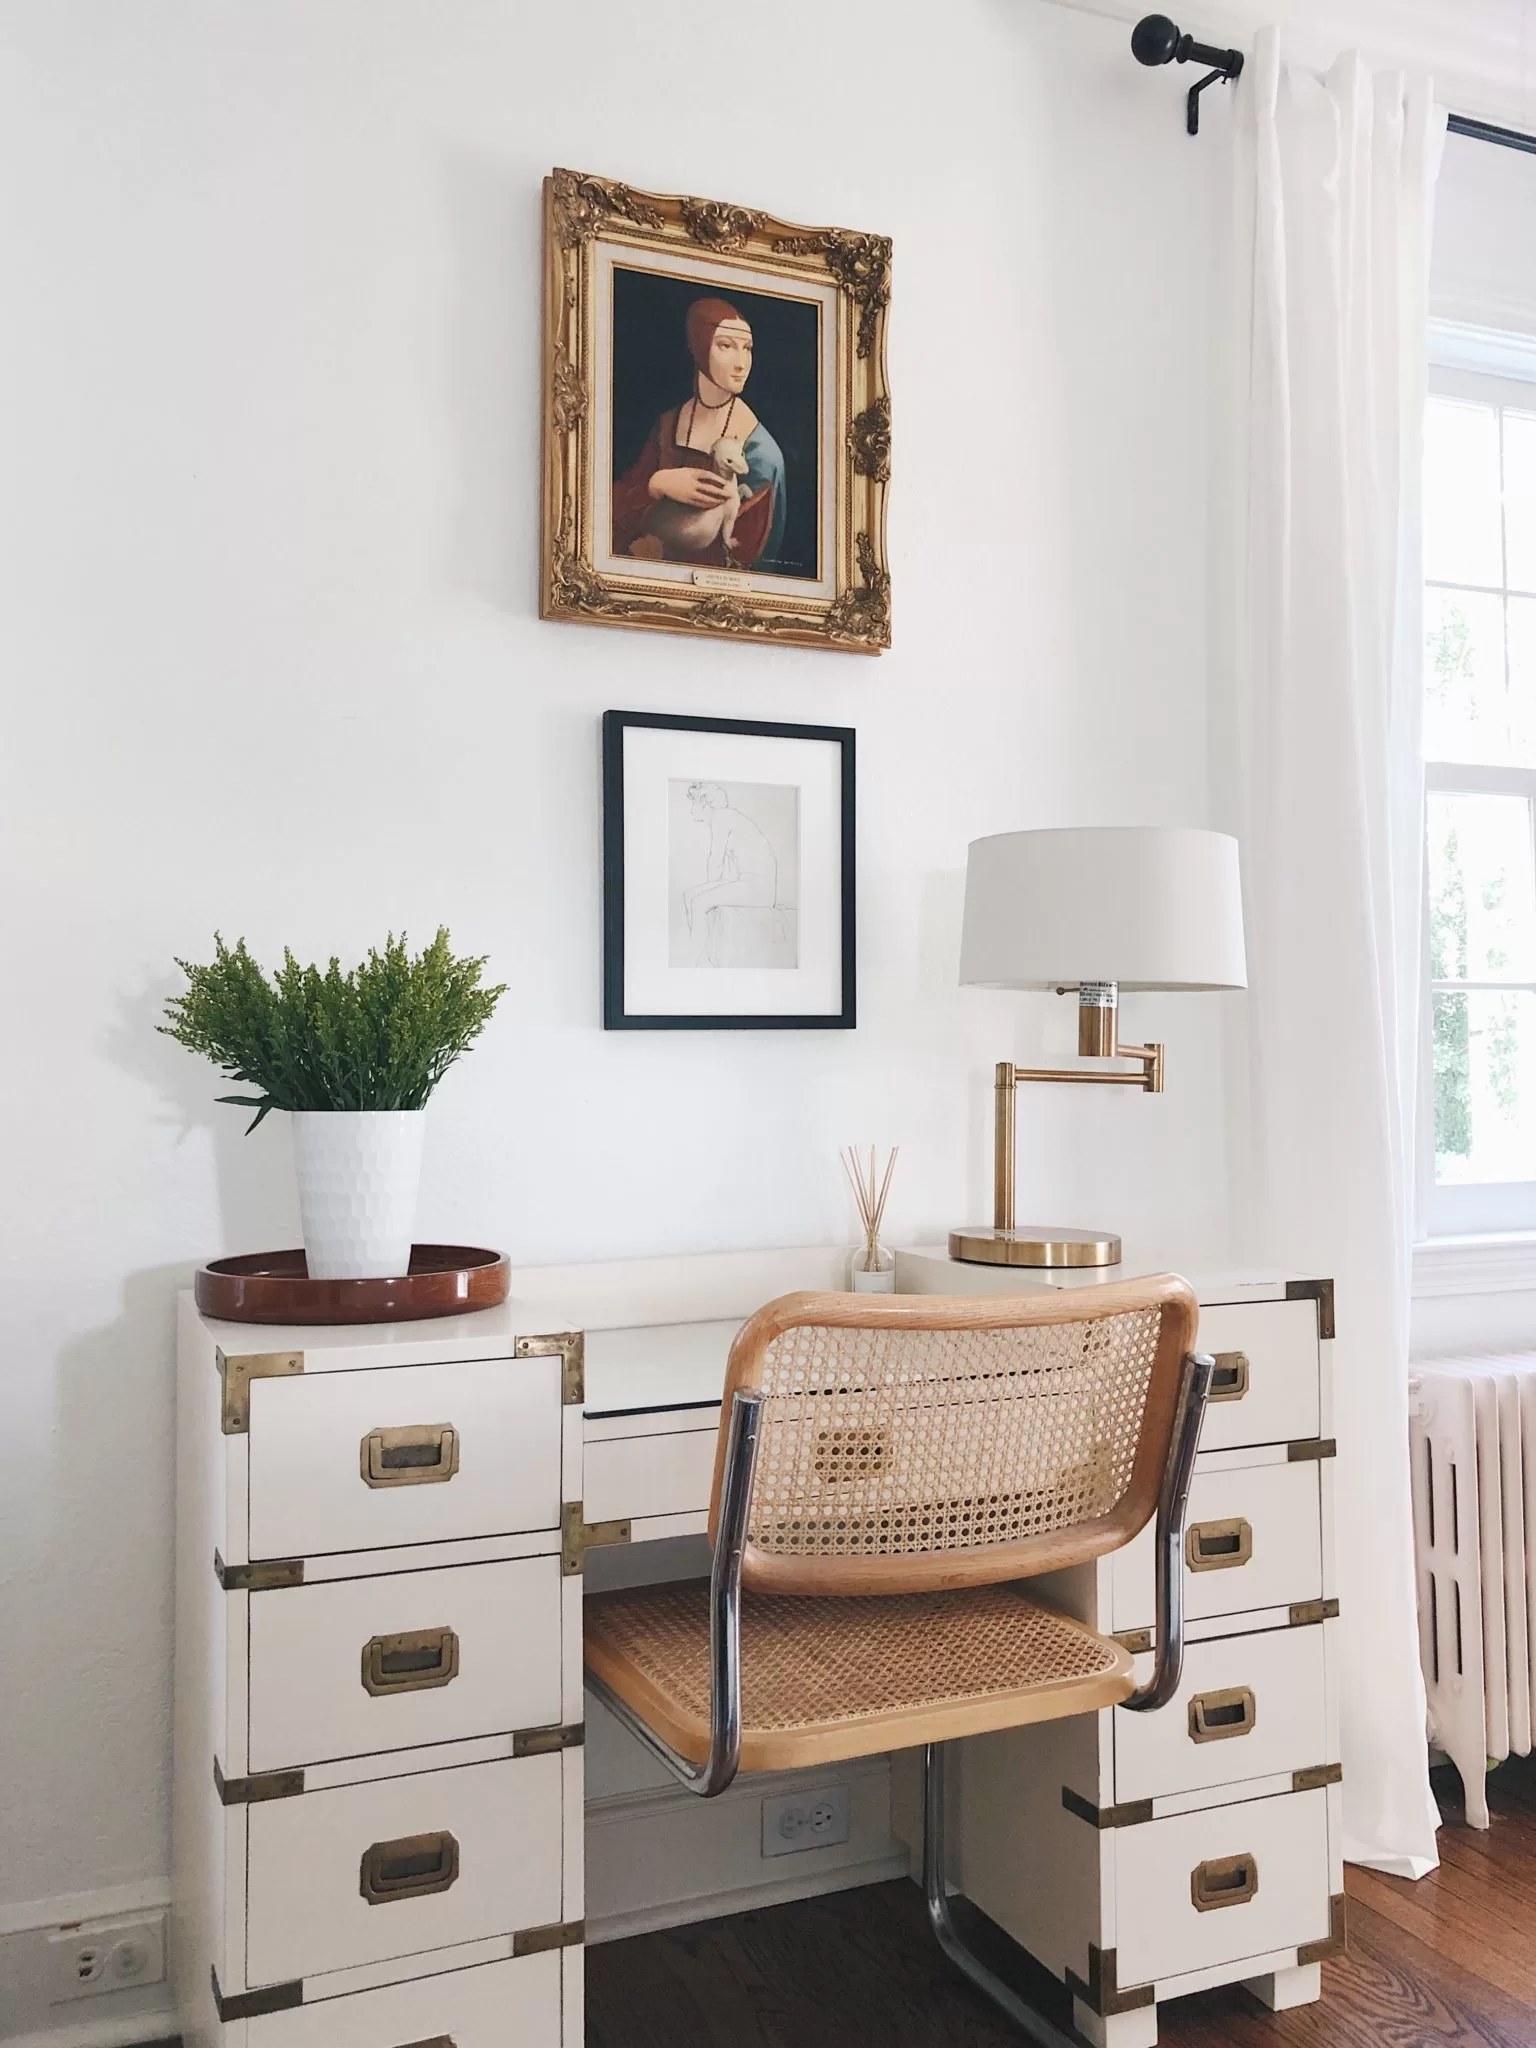 White living room - campaign desk with vintage chair and art